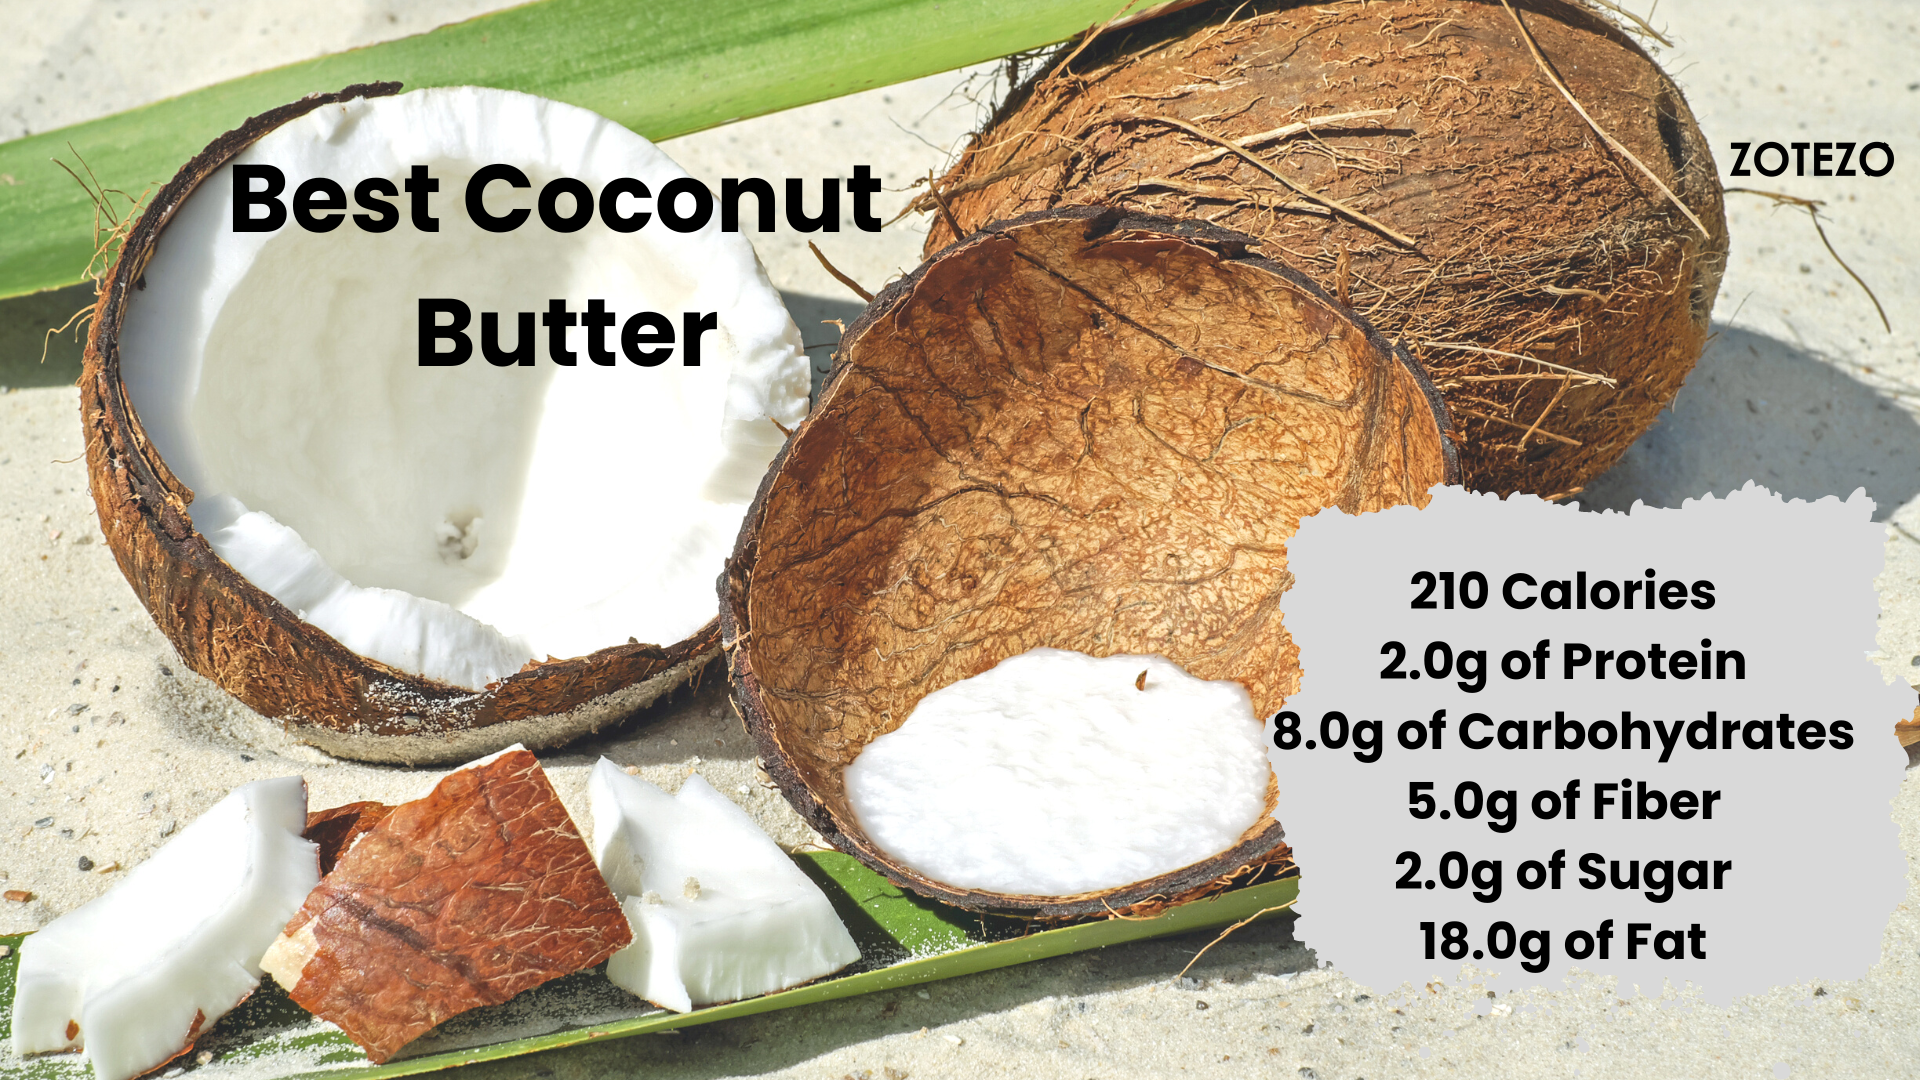 Coconut Butter in Germany